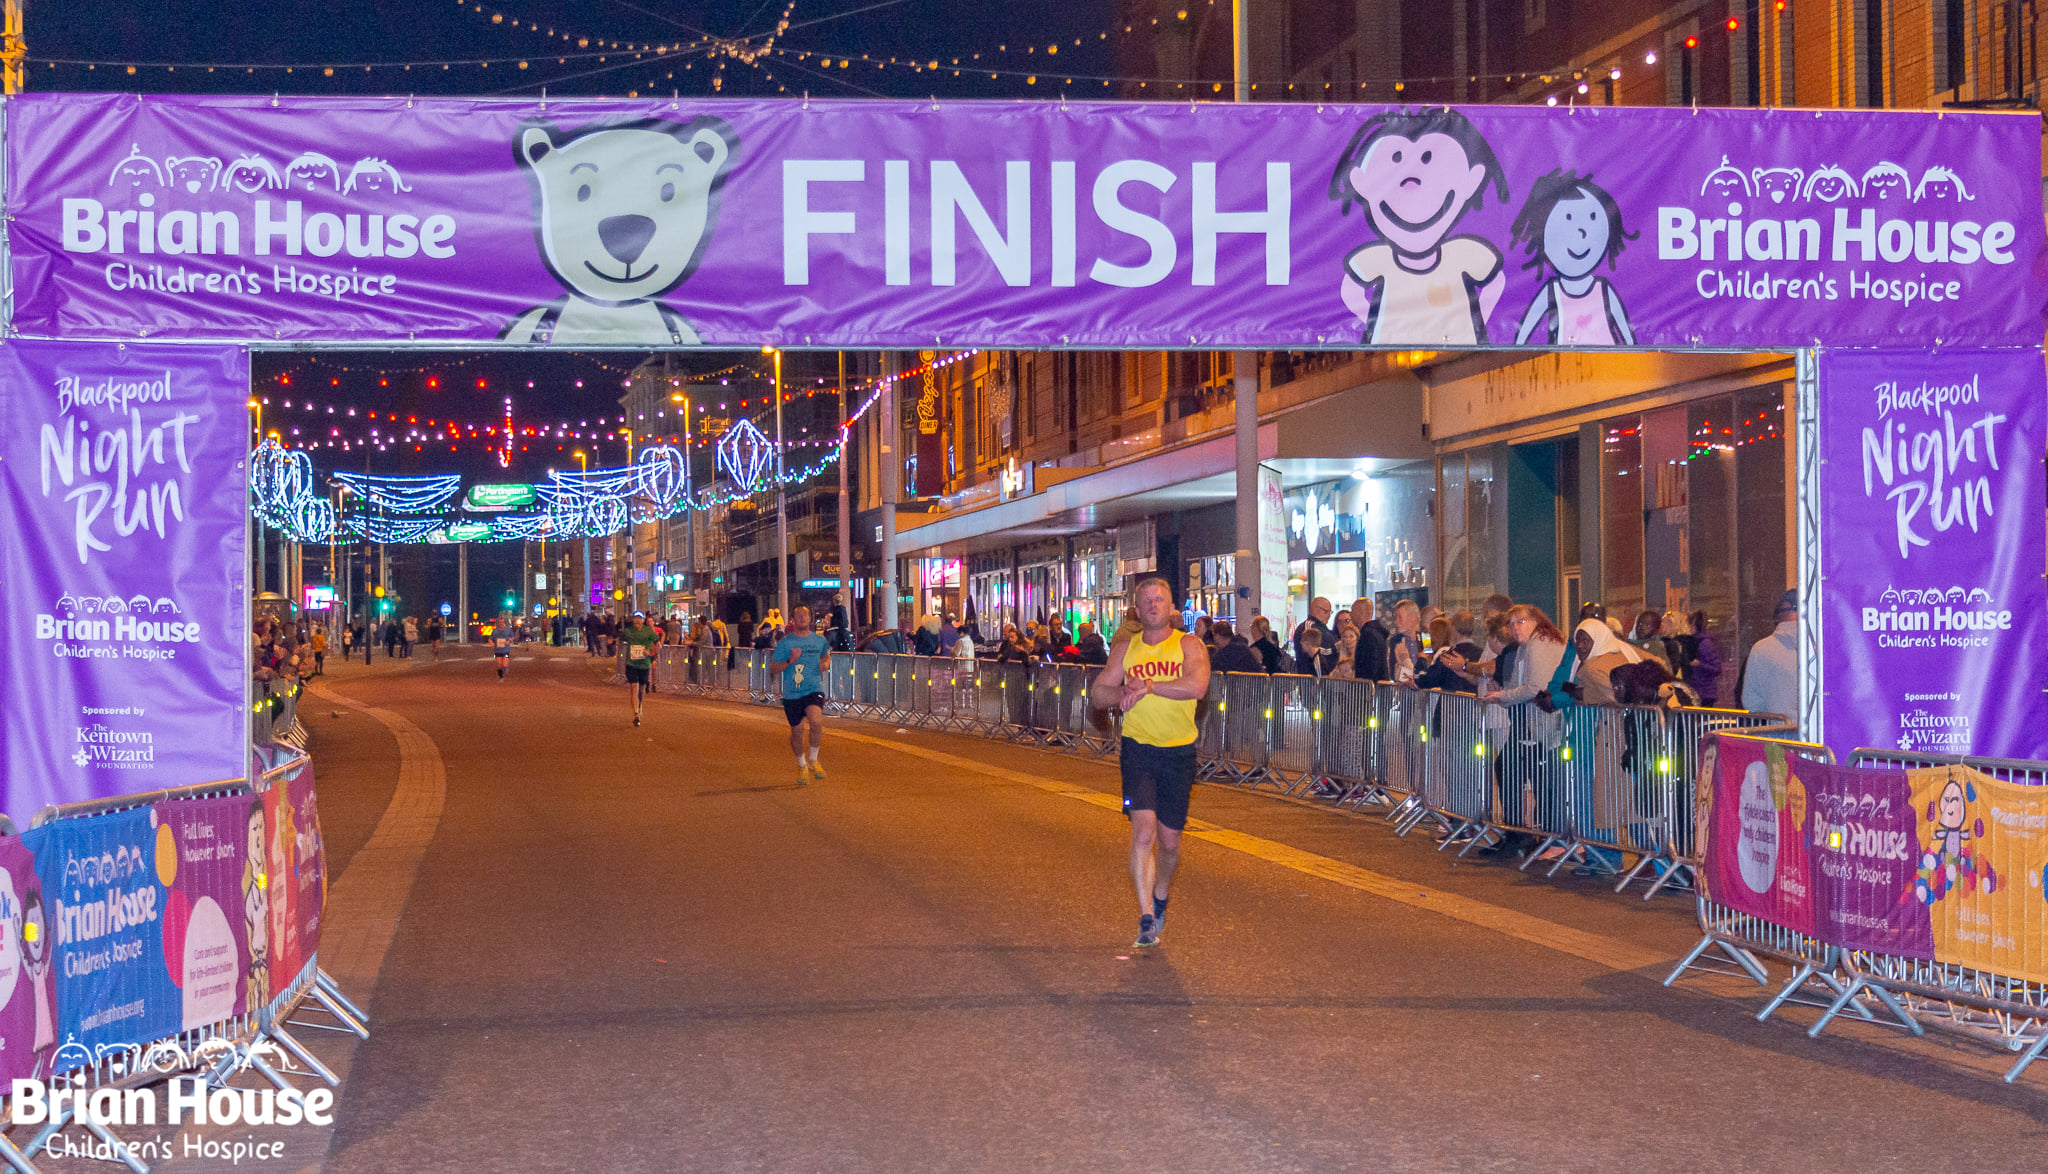 VisitBlackpool on Twitter: "Entries are now open for the Blackpool Night Run  🏃 The popular organised run, which sees thousands of runners take their  mark for a charity dash down the traffic-free